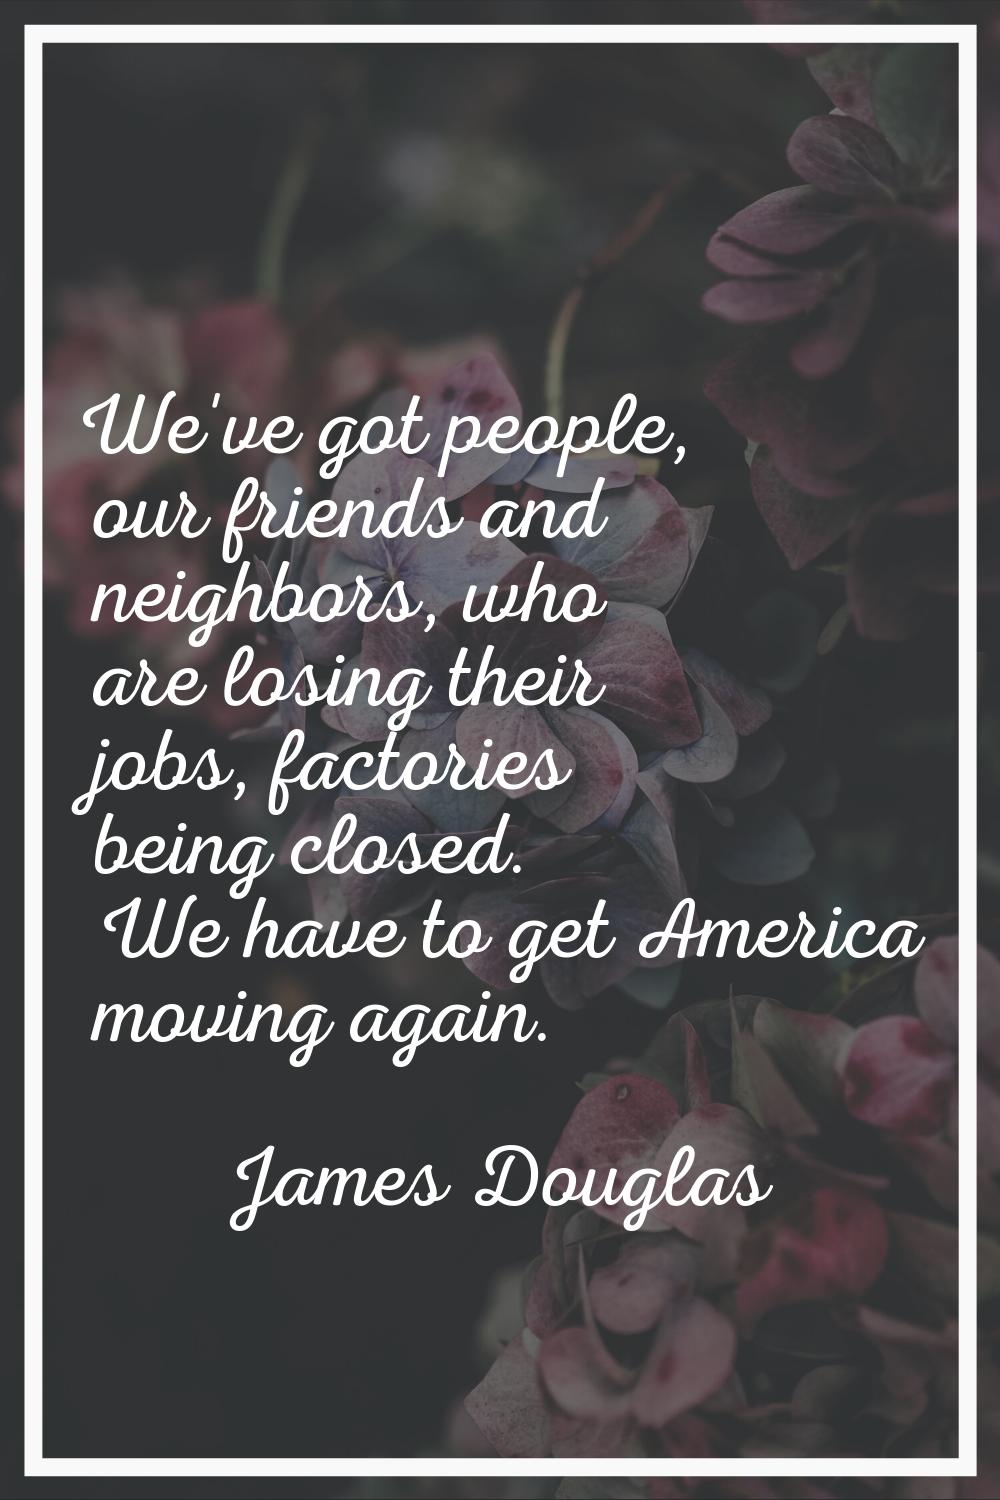 We've got people, our friends and neighbors, who are losing their jobs, factories being closed. We 